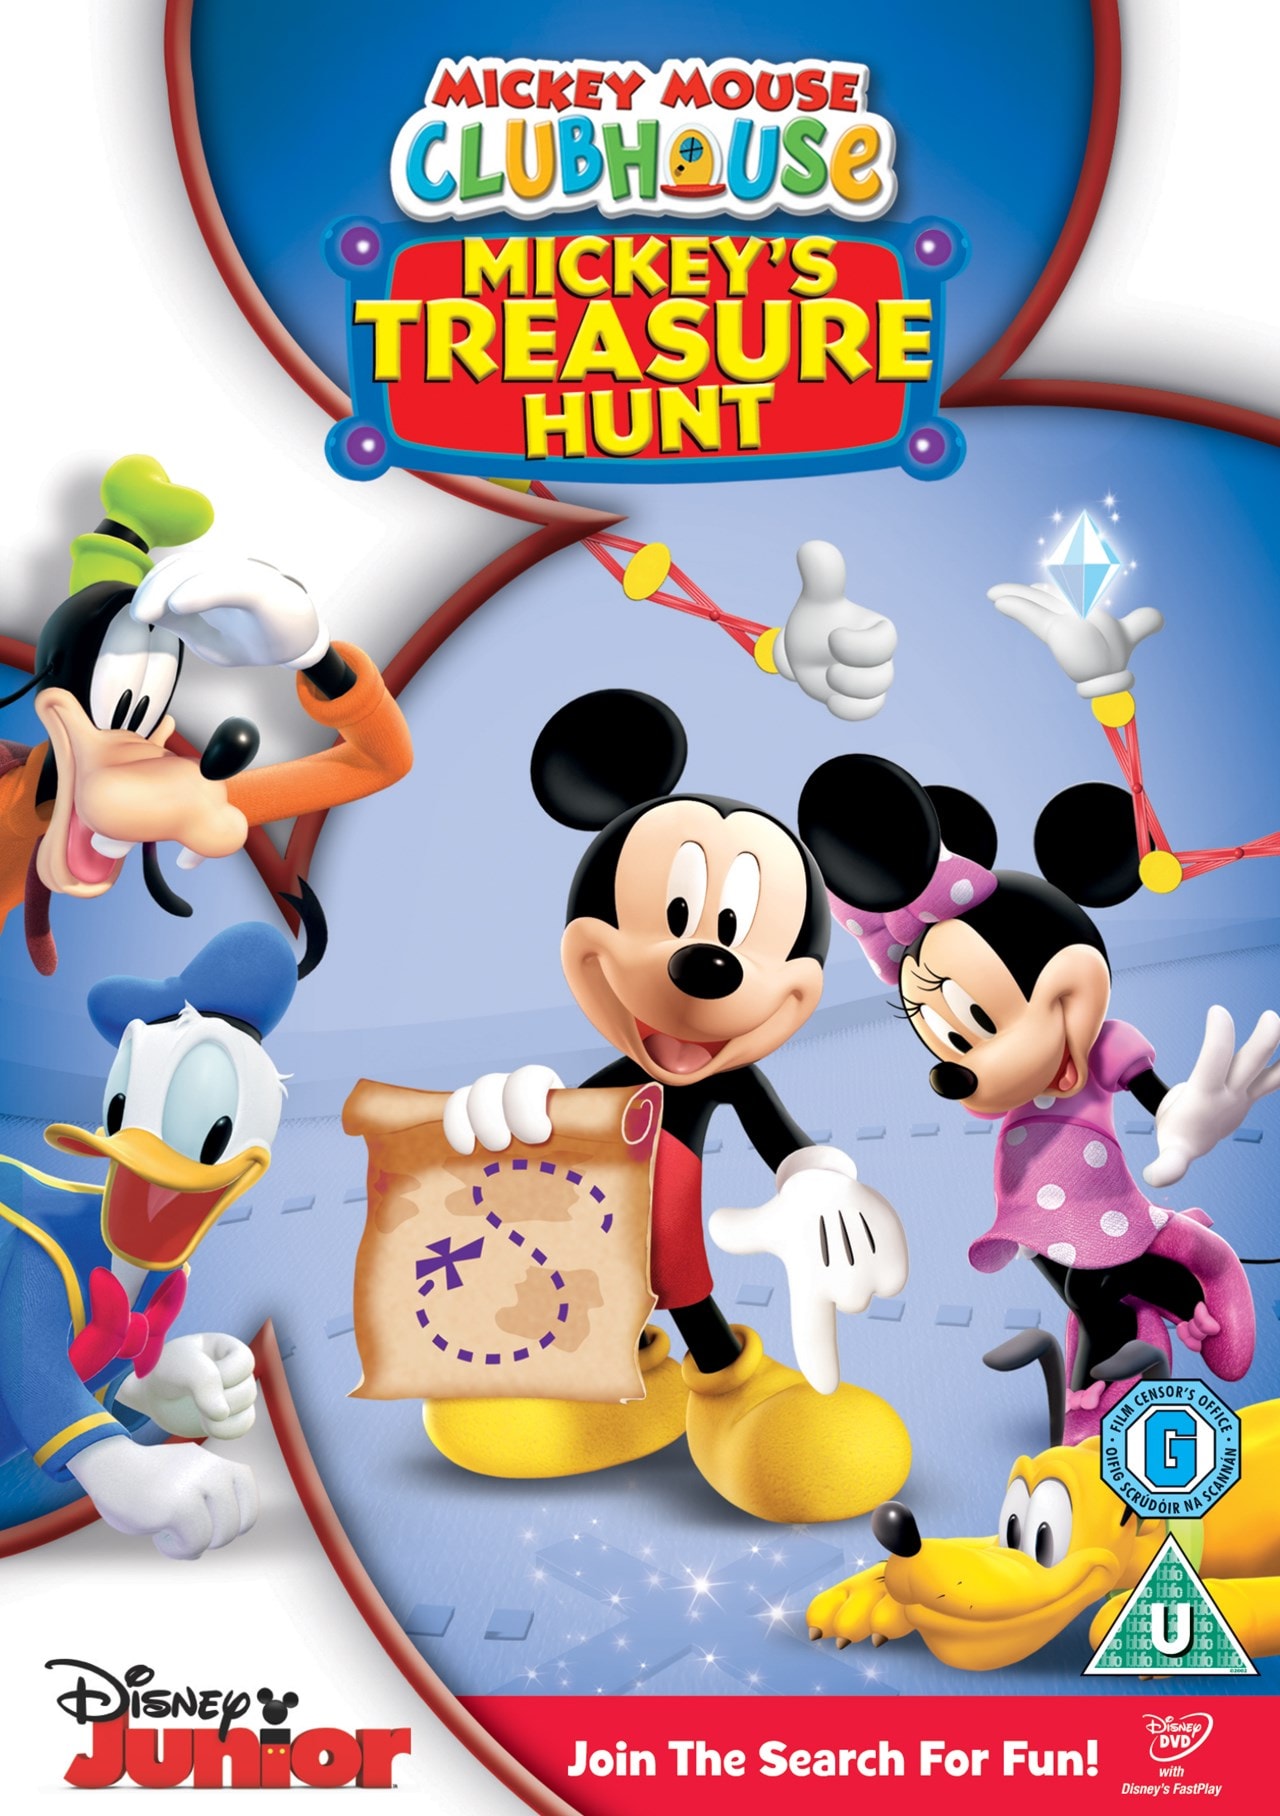 Mickey Mouse Clubhouse: Treasure Hunt | DVD | Free shipping over £20 ...